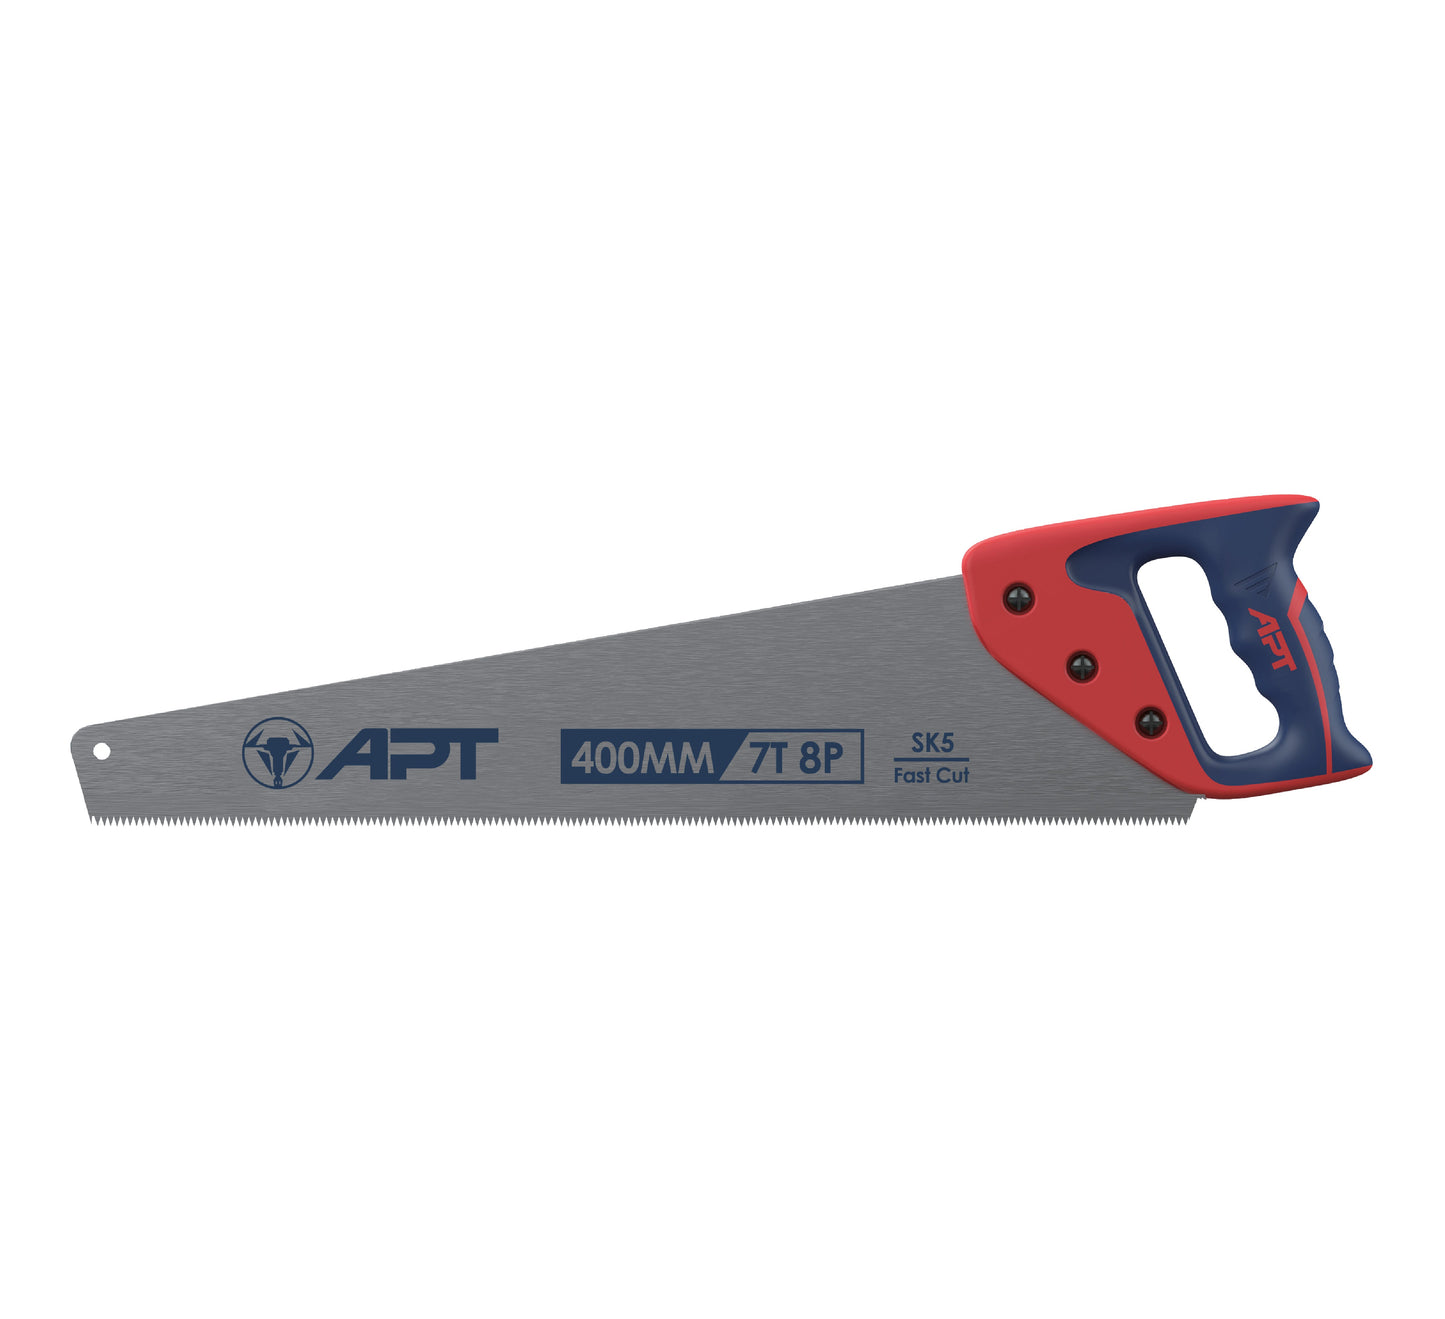 APT HAND SAW FOR WOOD APT NEW PLASTIC&RUBBER HANDLE 400MM-AH0121130-16( 5013D-16"